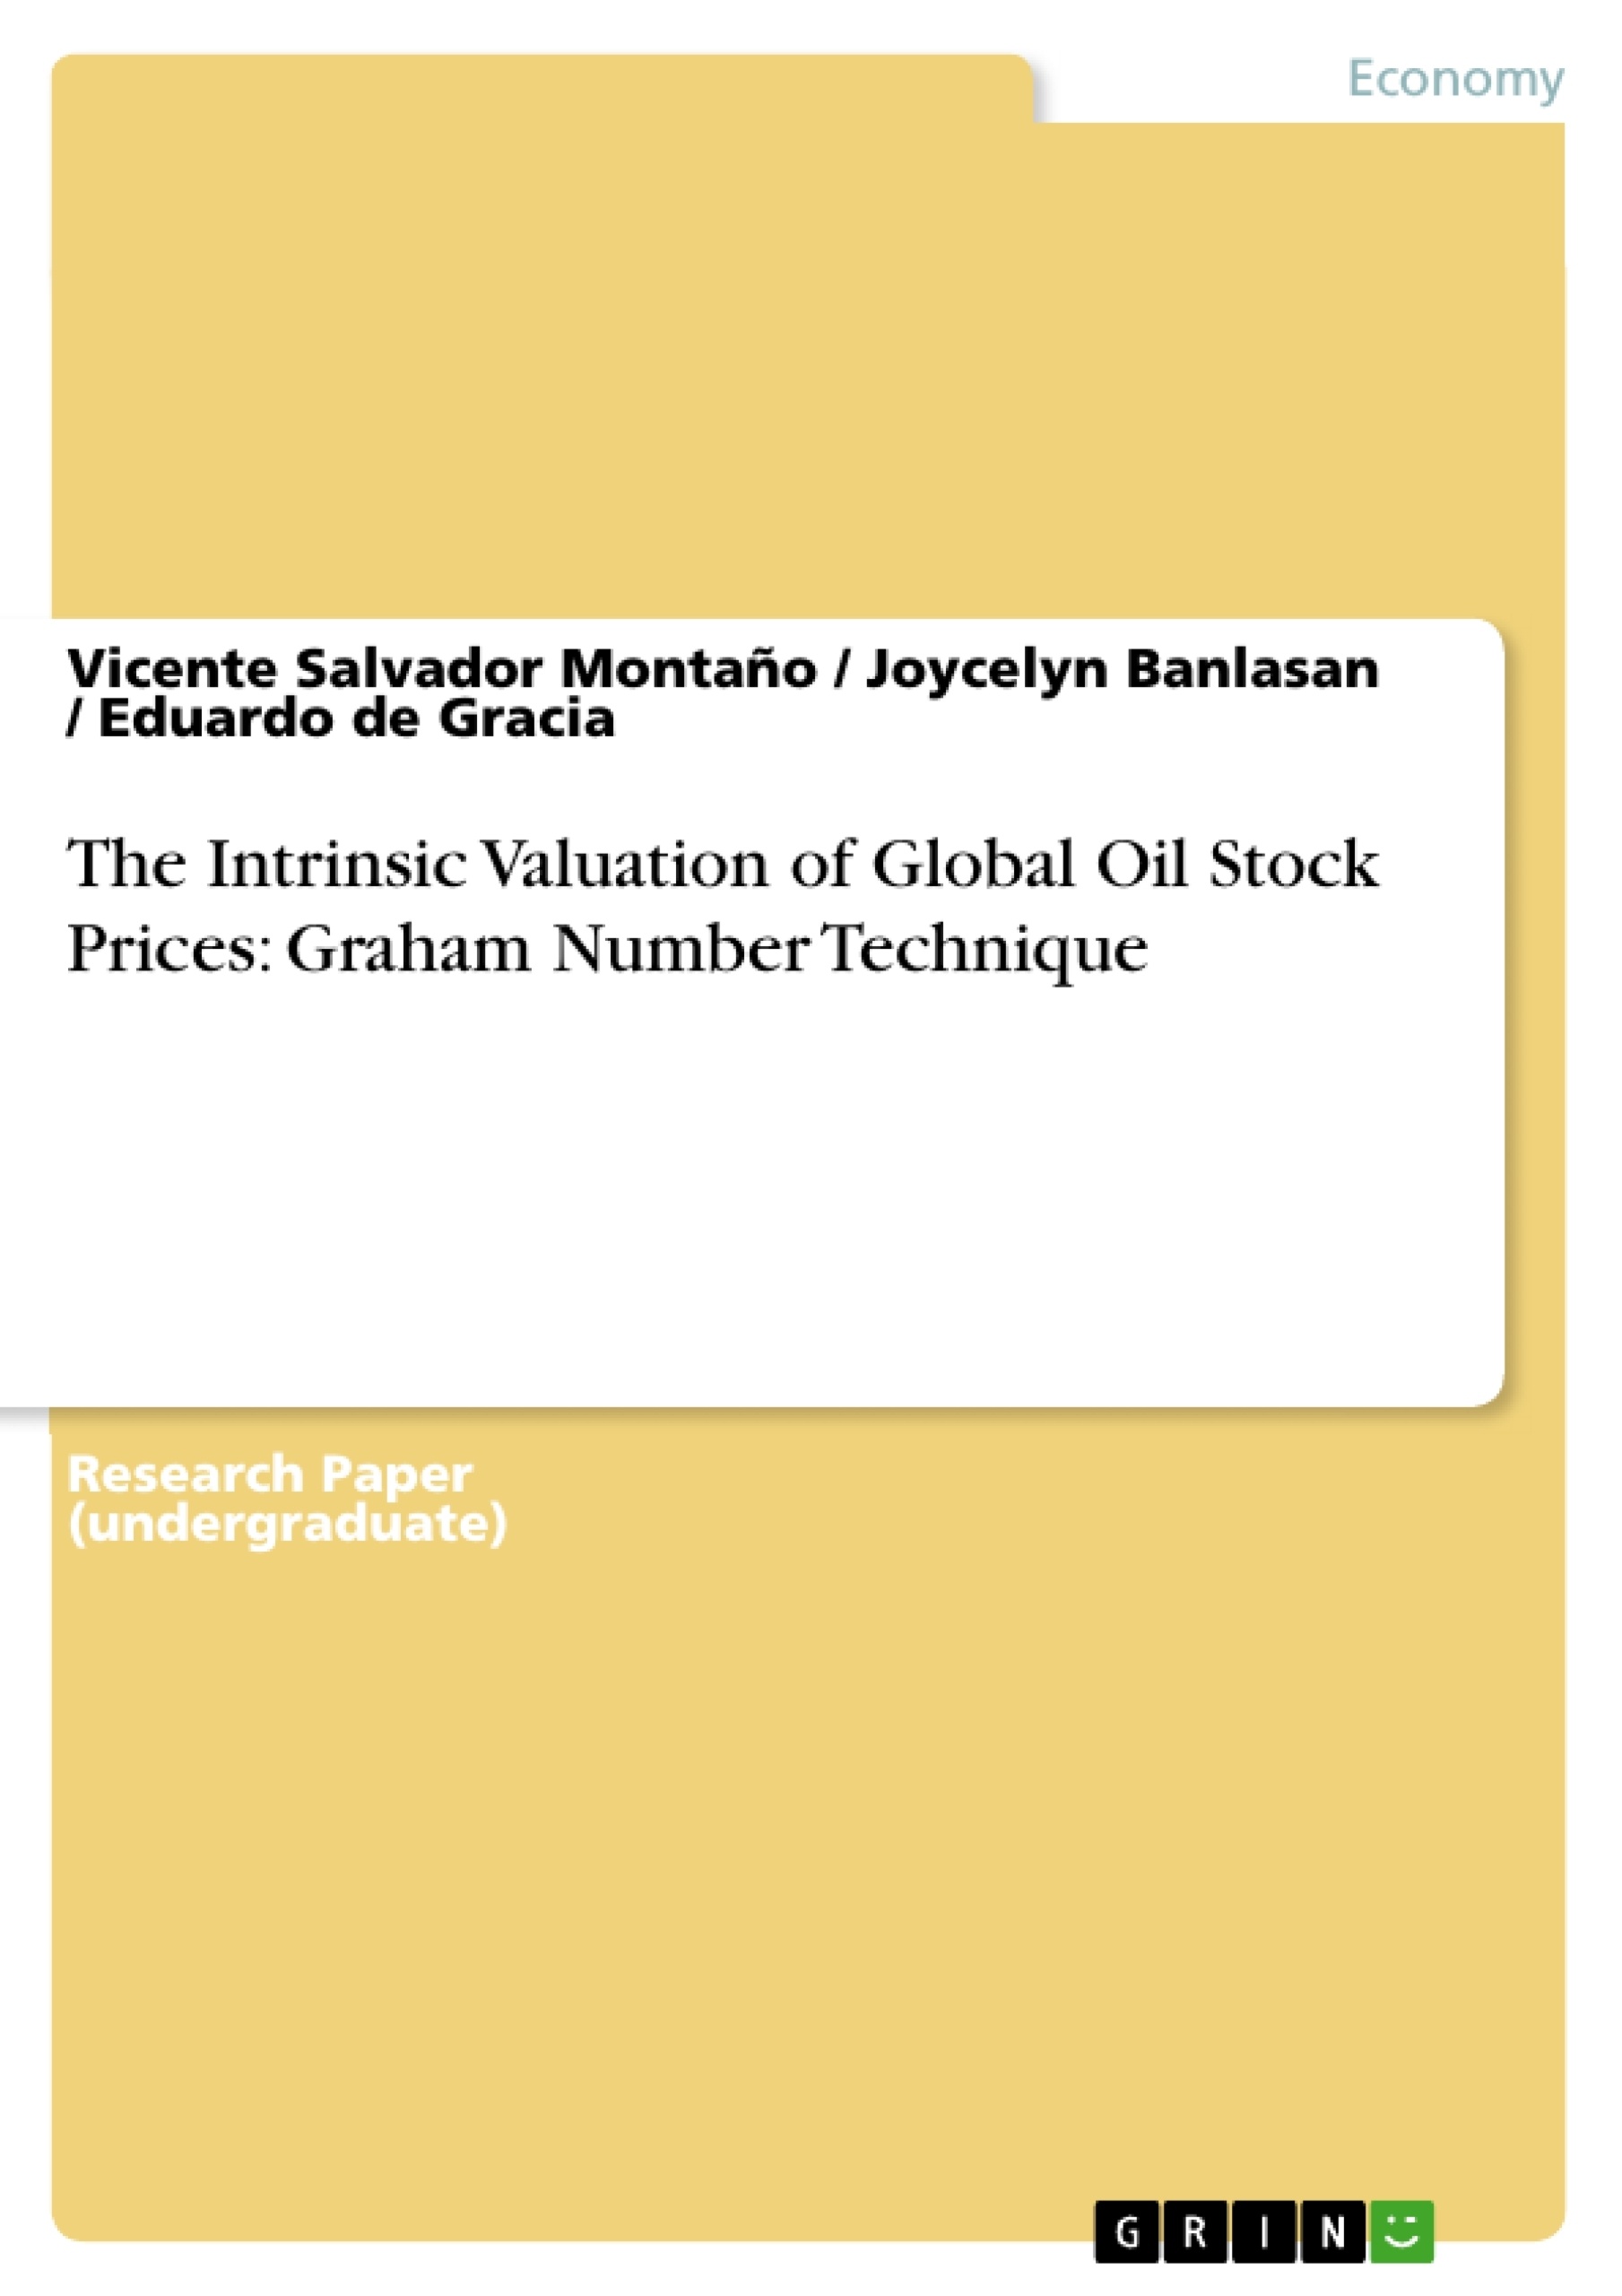 Title: The Intrinsic Valuation of Global Oil Stock Prices: Graham Number Technique